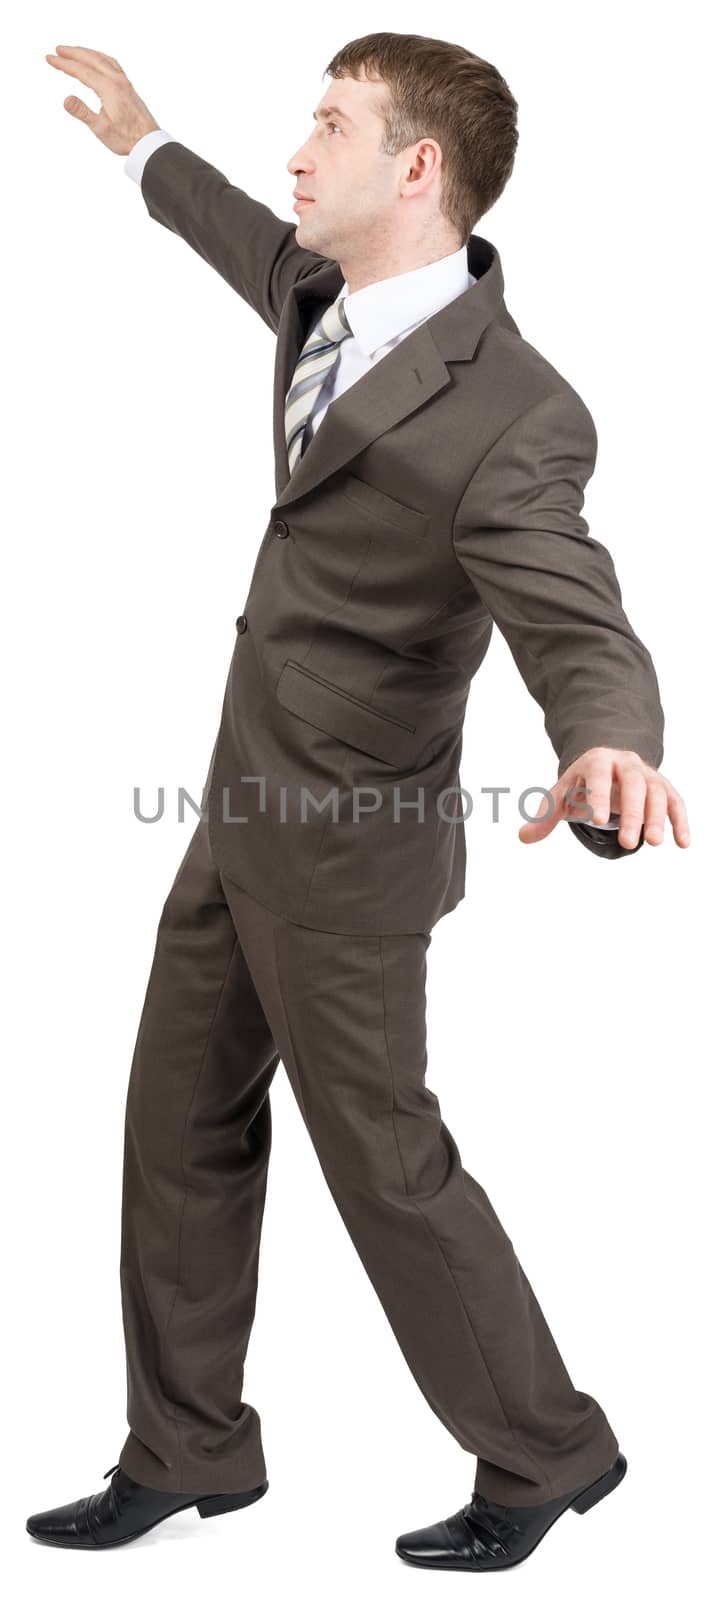 Businessman standing on tiptoes isolated on white background